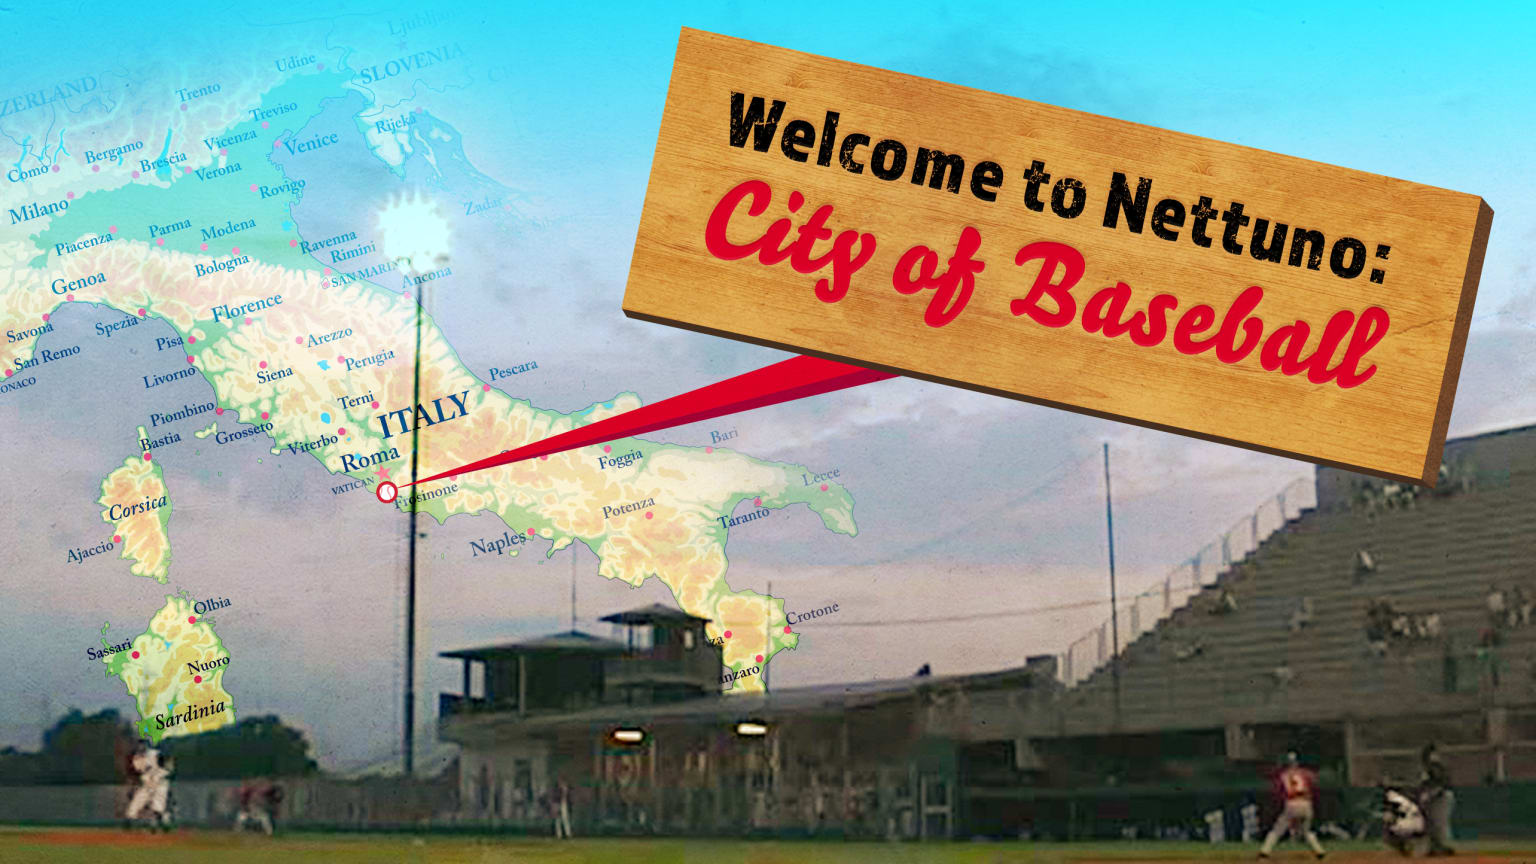 A map of Italy with a sign reading ''Welcome to Nettuno: City of Baseball'' pointing to a spot on the map, overlaid on a photo of a baseball game